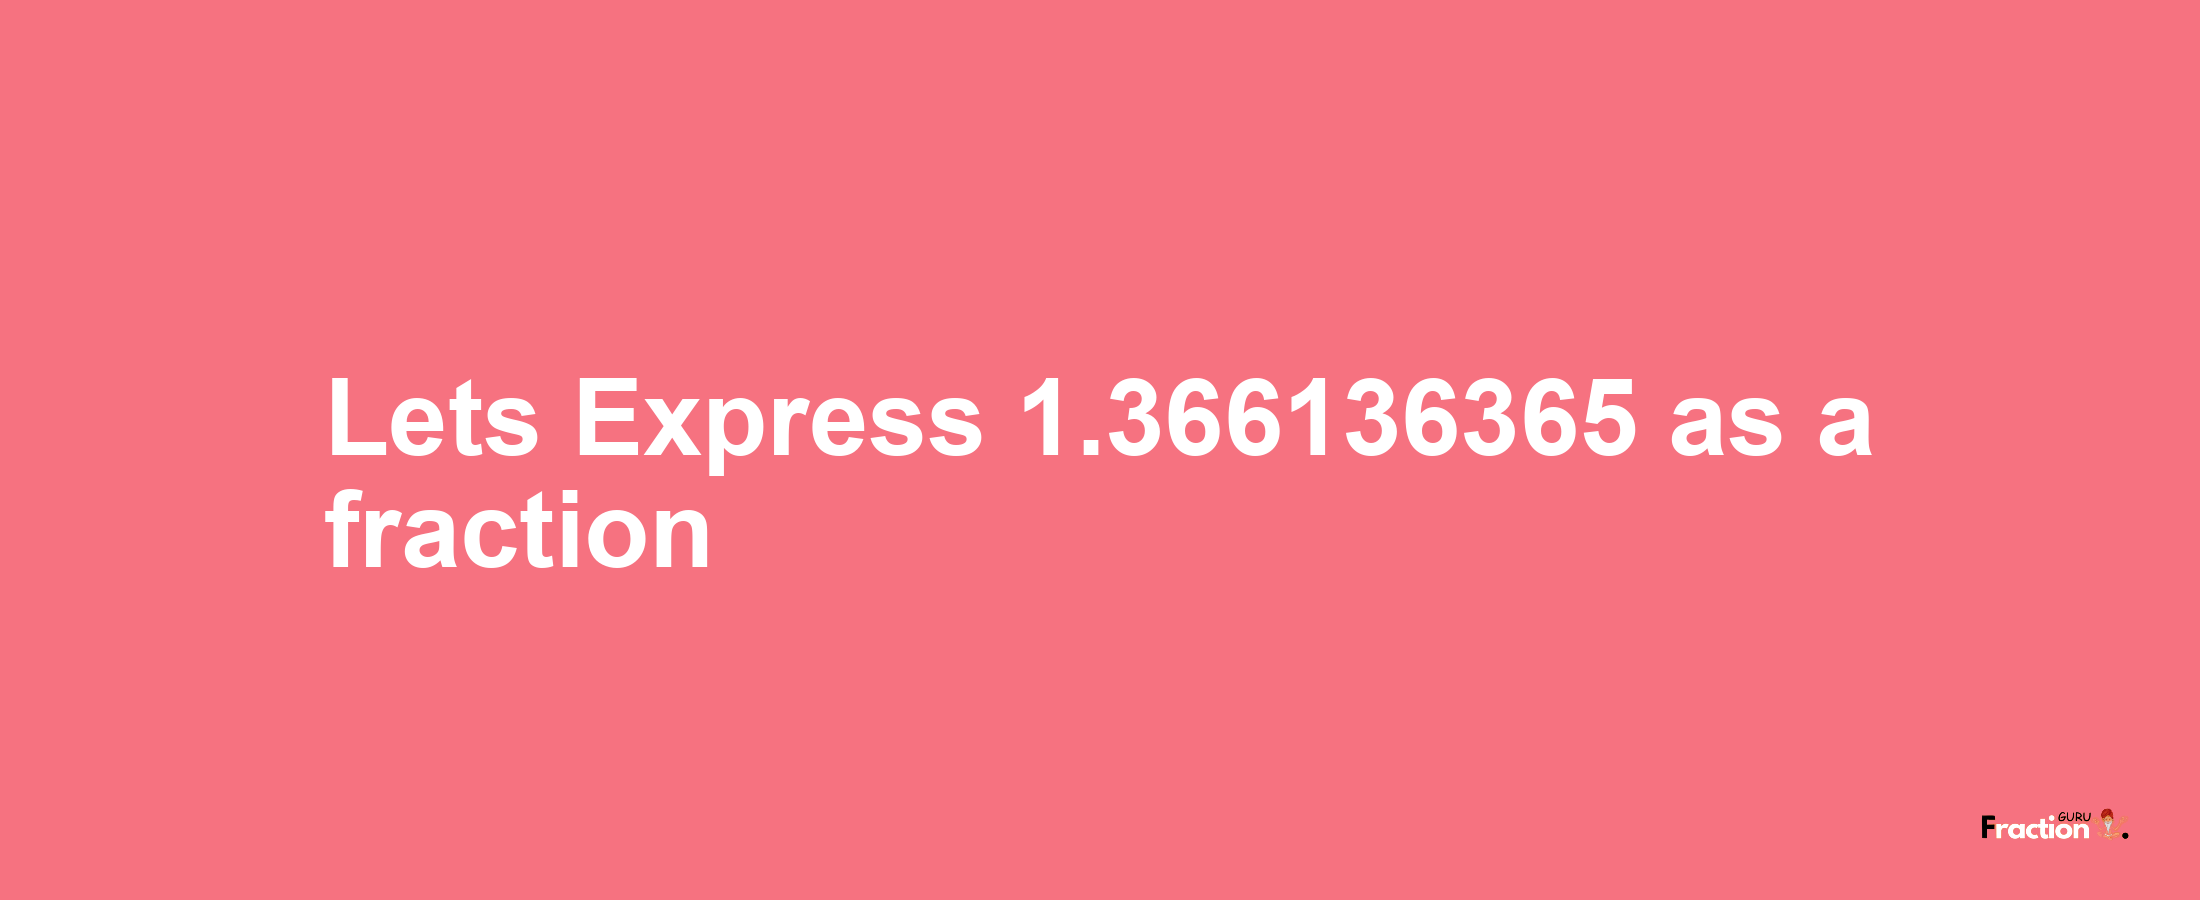 Lets Express 1.366136365 as afraction